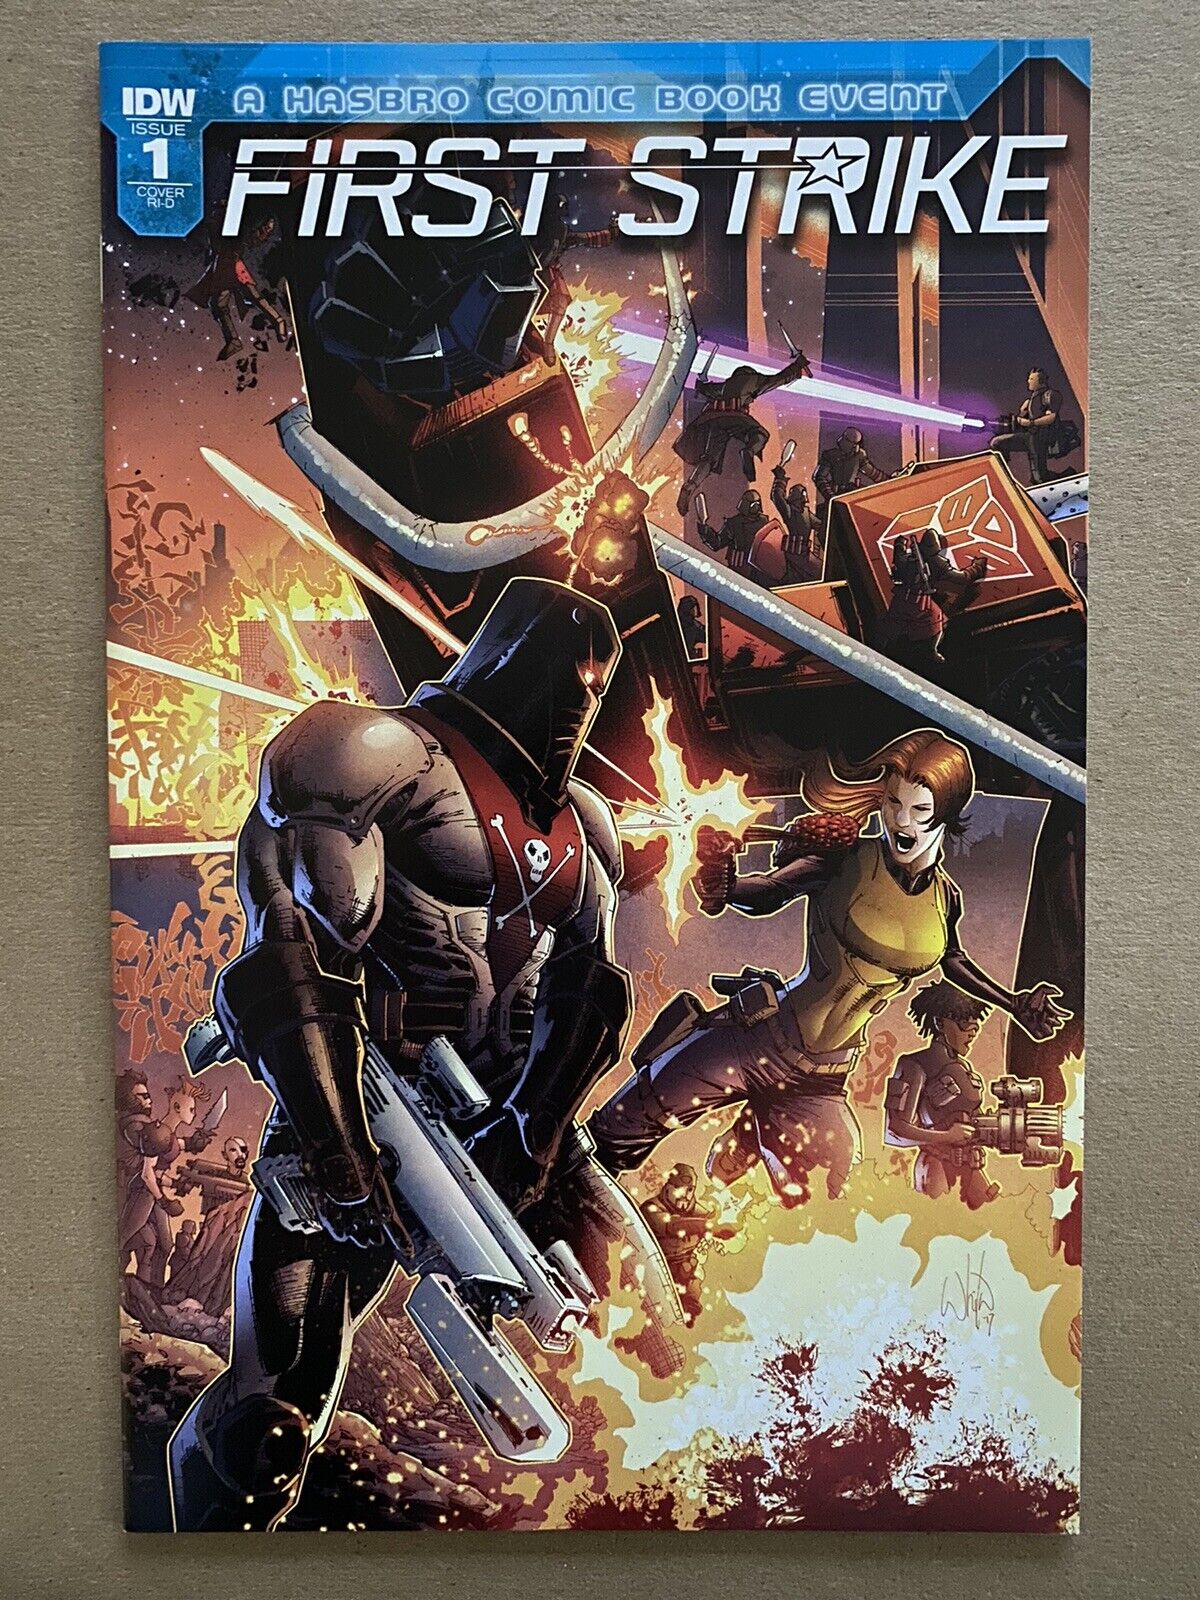 First Strike #1 2017 IDW 1:50 Retailer Incentive Variant Comic Book